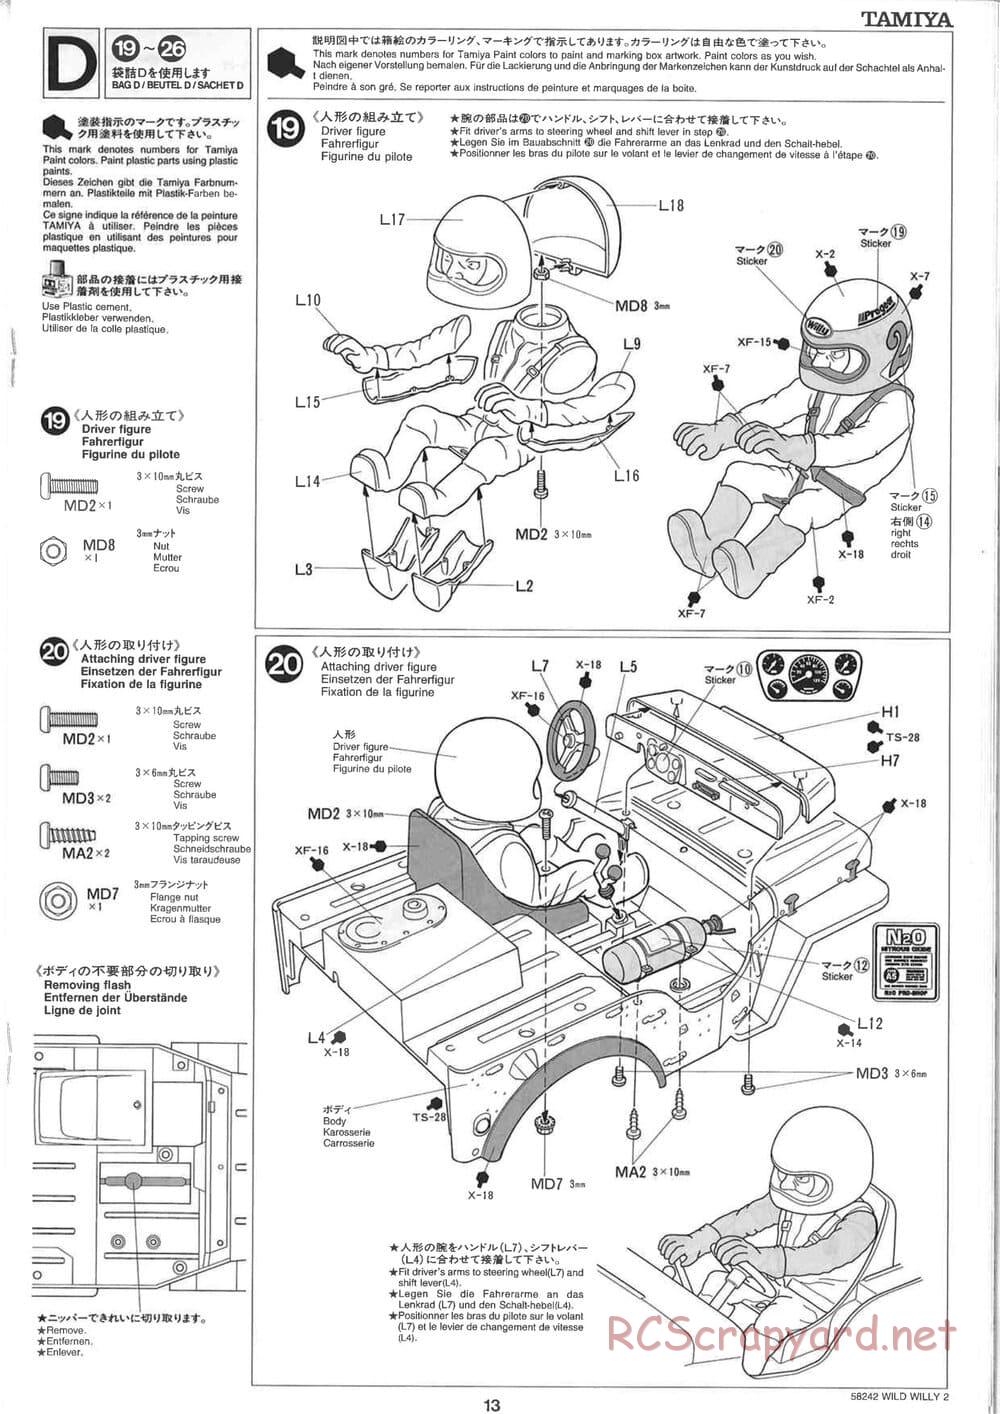 Tamiya - Wild Willy 2 - WR-02 Chassis - Manual - Page 13